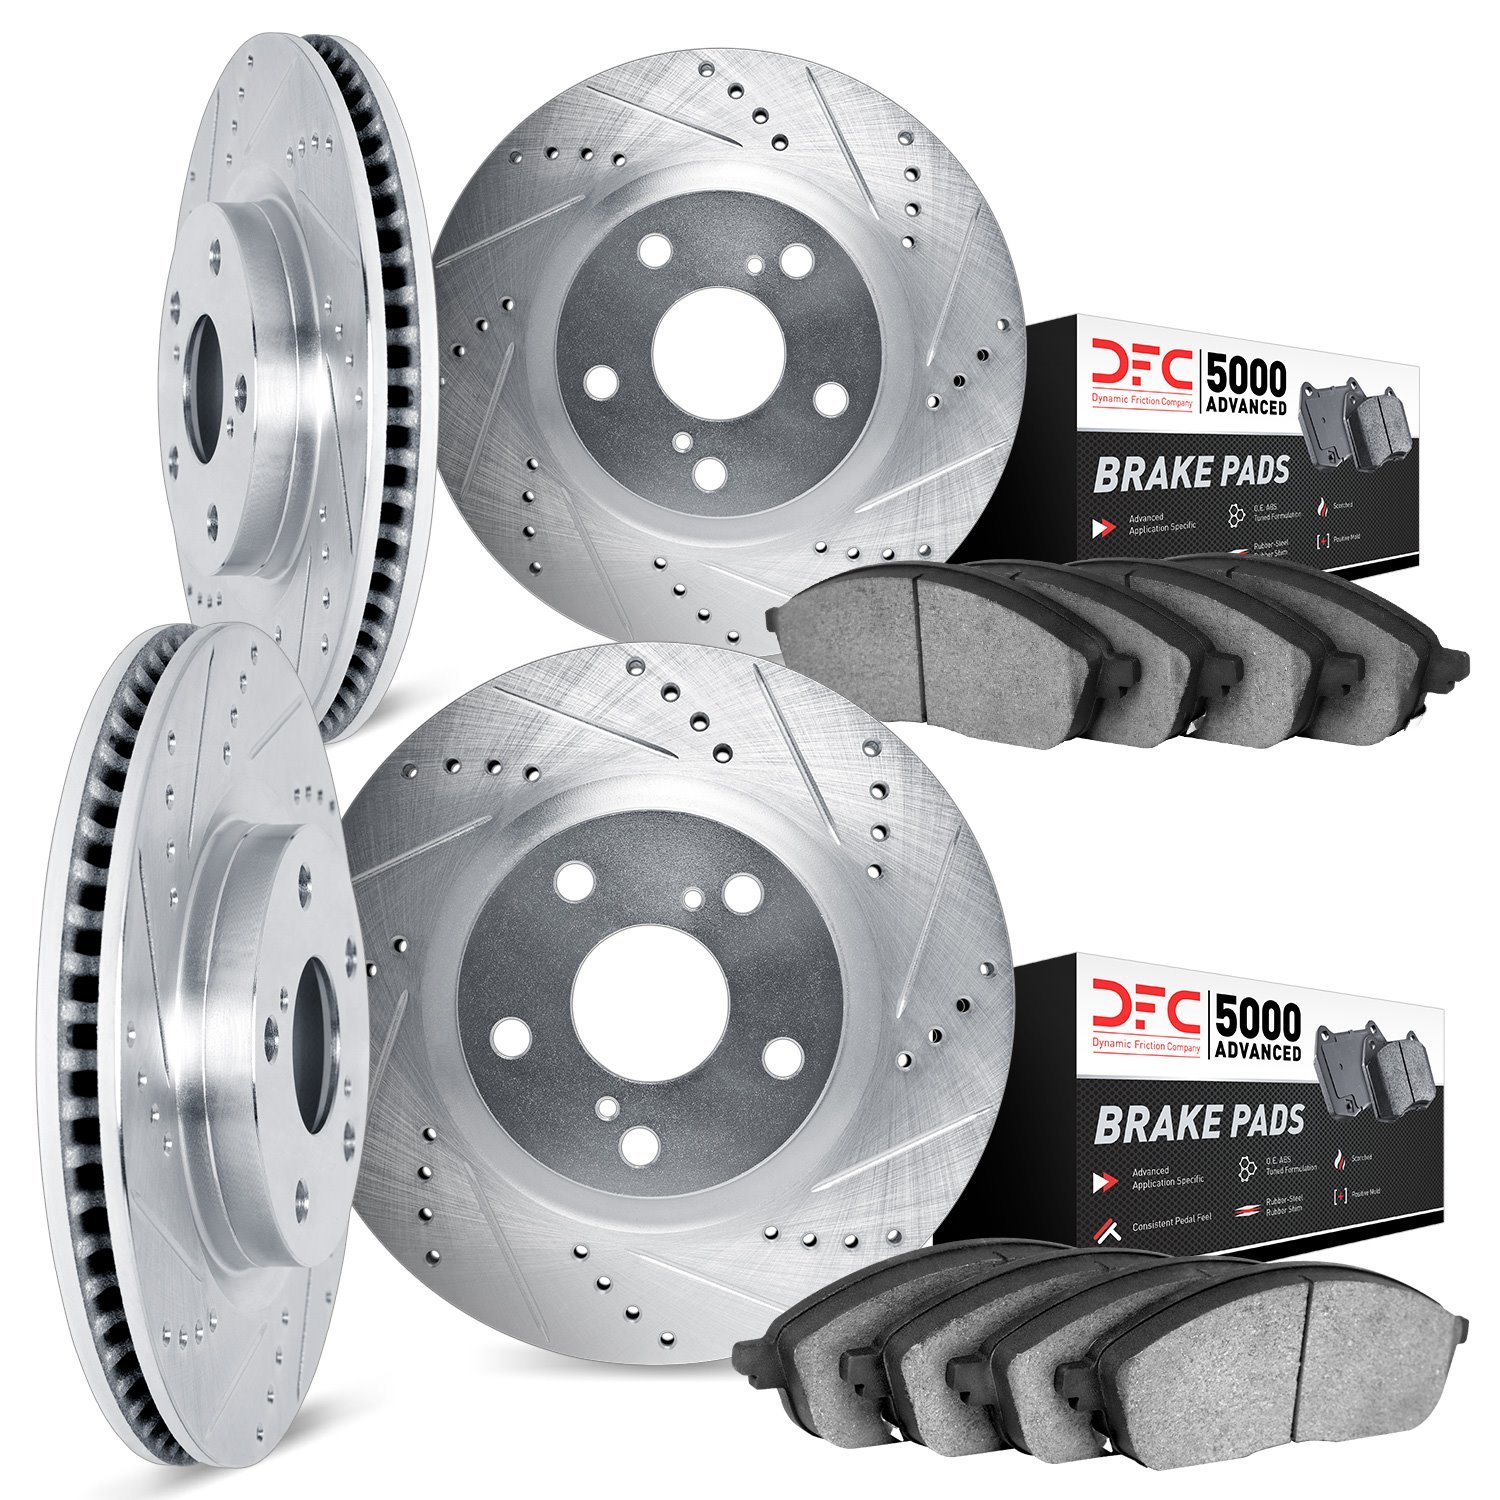 7504-52028 Drilled/Slotted Brake Rotors w/5000 Advanced Brake Pads Kit [Silver], 1988-1988 GM, Position: Front and Rear